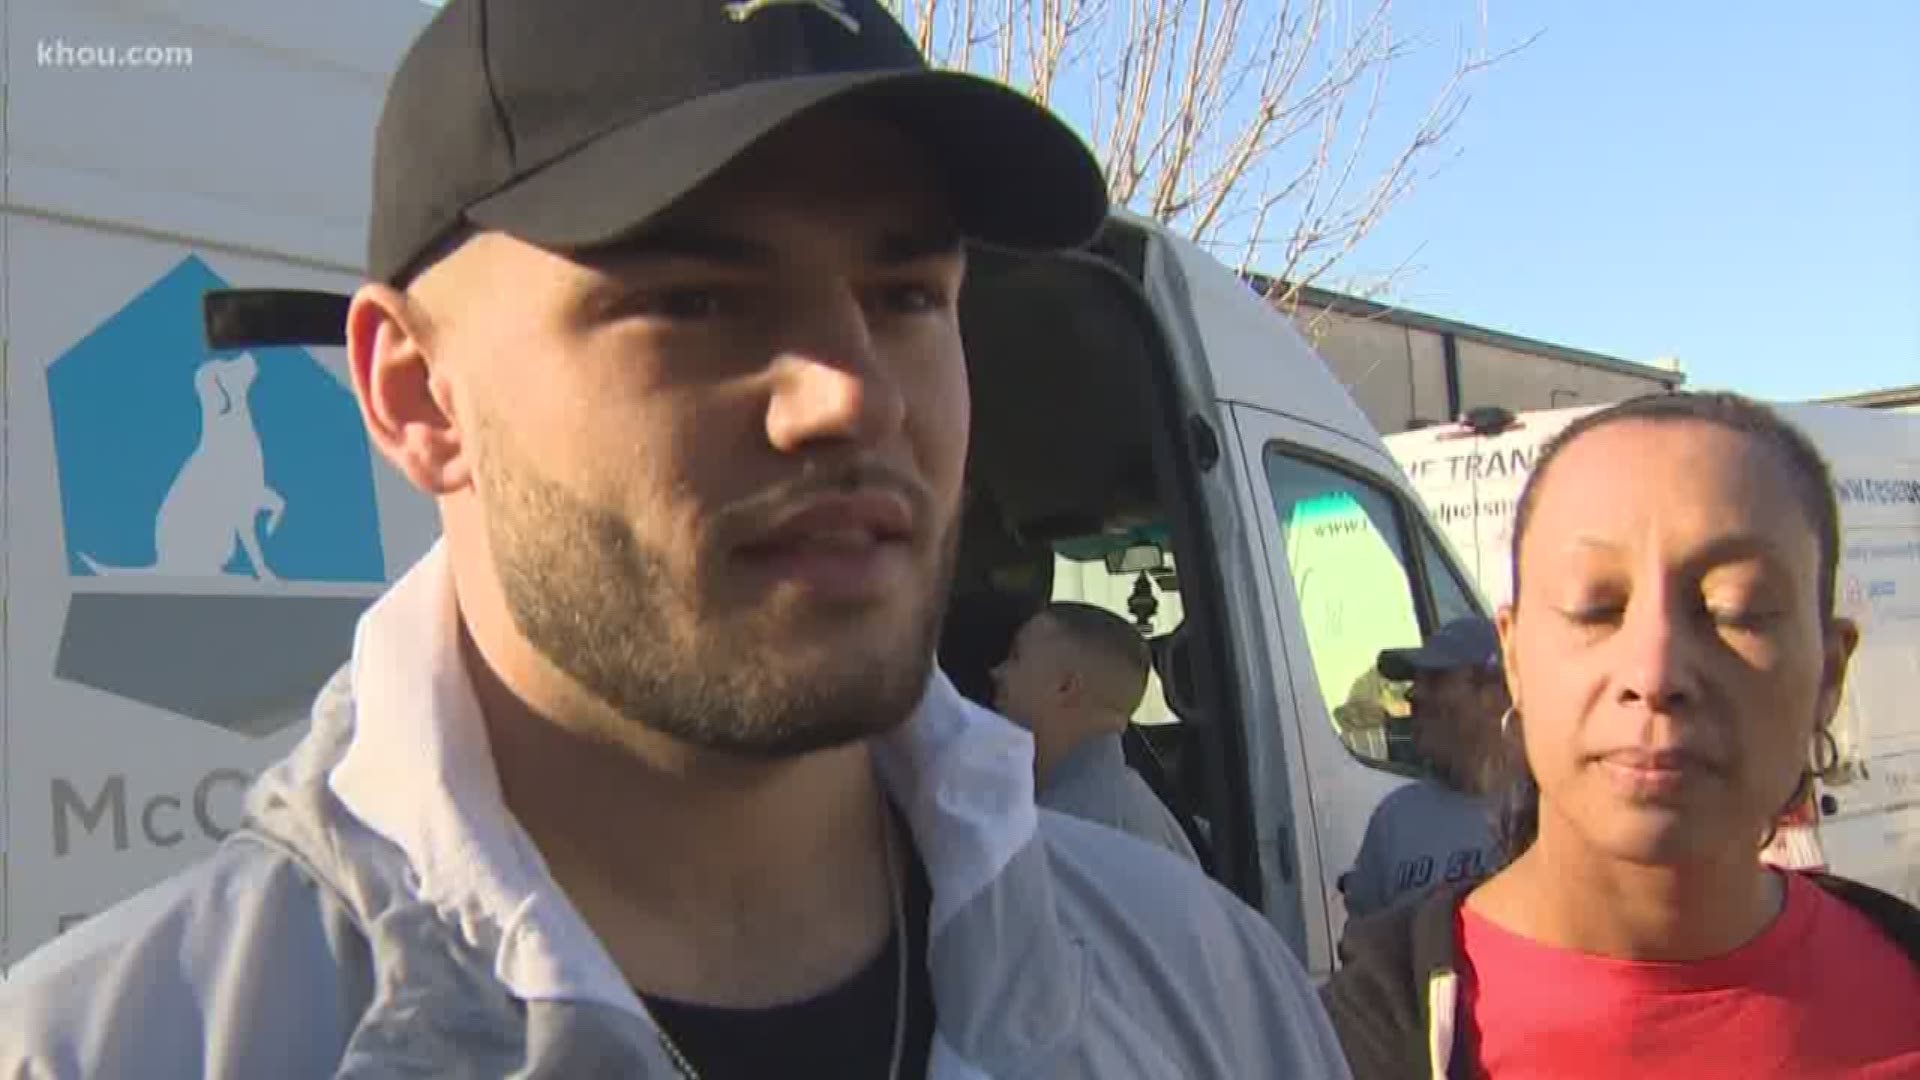 More than 100 pets are on their way to Colorado to a better life thanks in part to Houston Astros pitcher Lance McCullers.